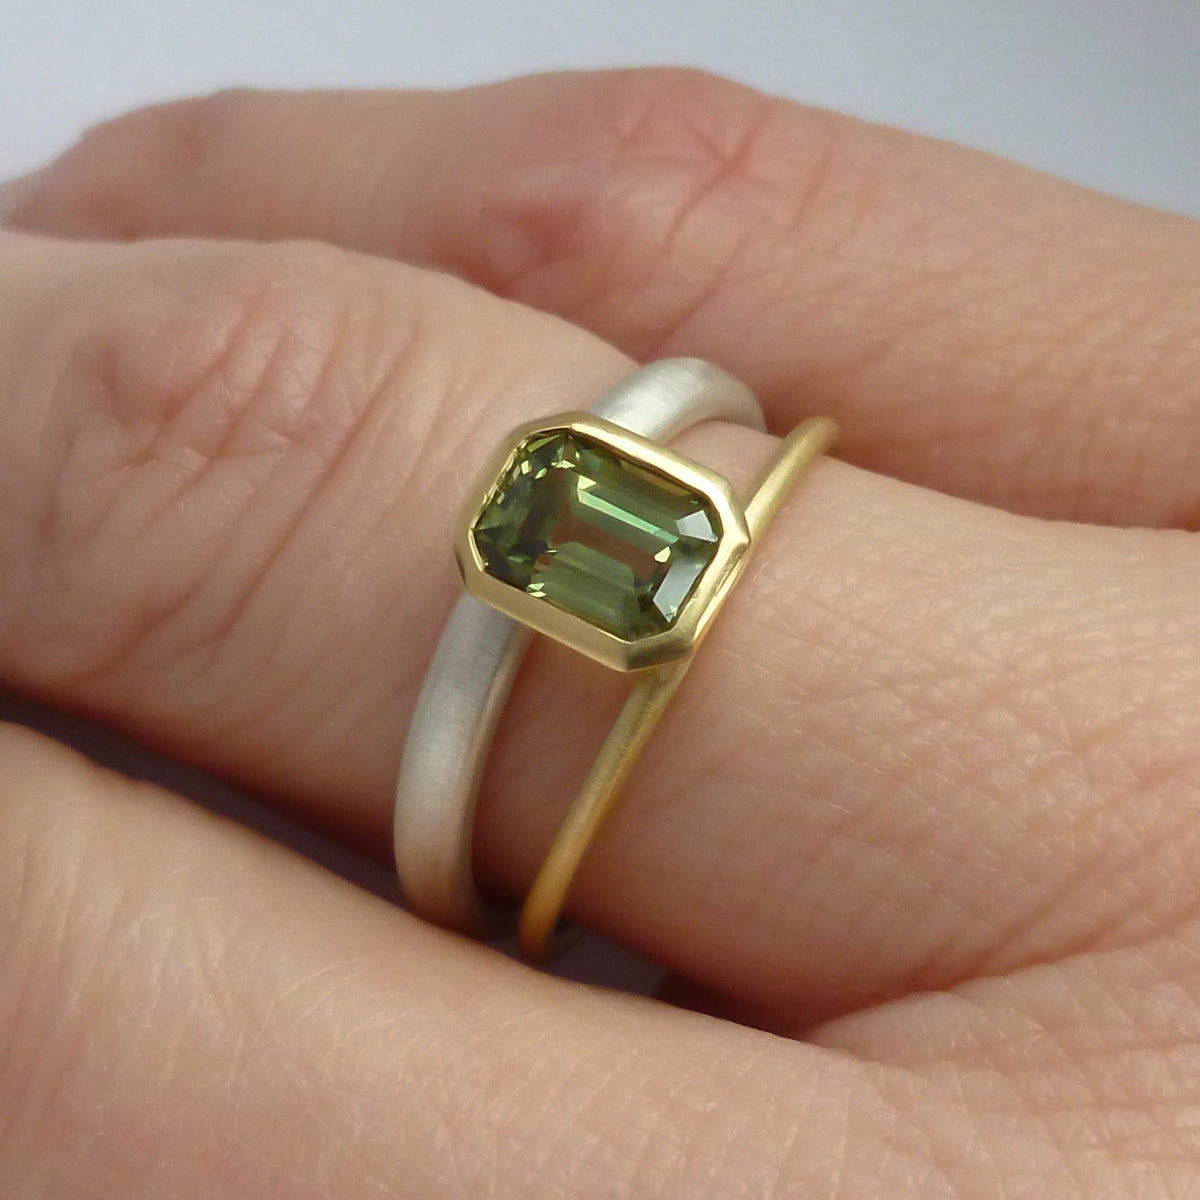 Octagonal green sapphire two tone dress or engagement ring - silver gold and contemporary.